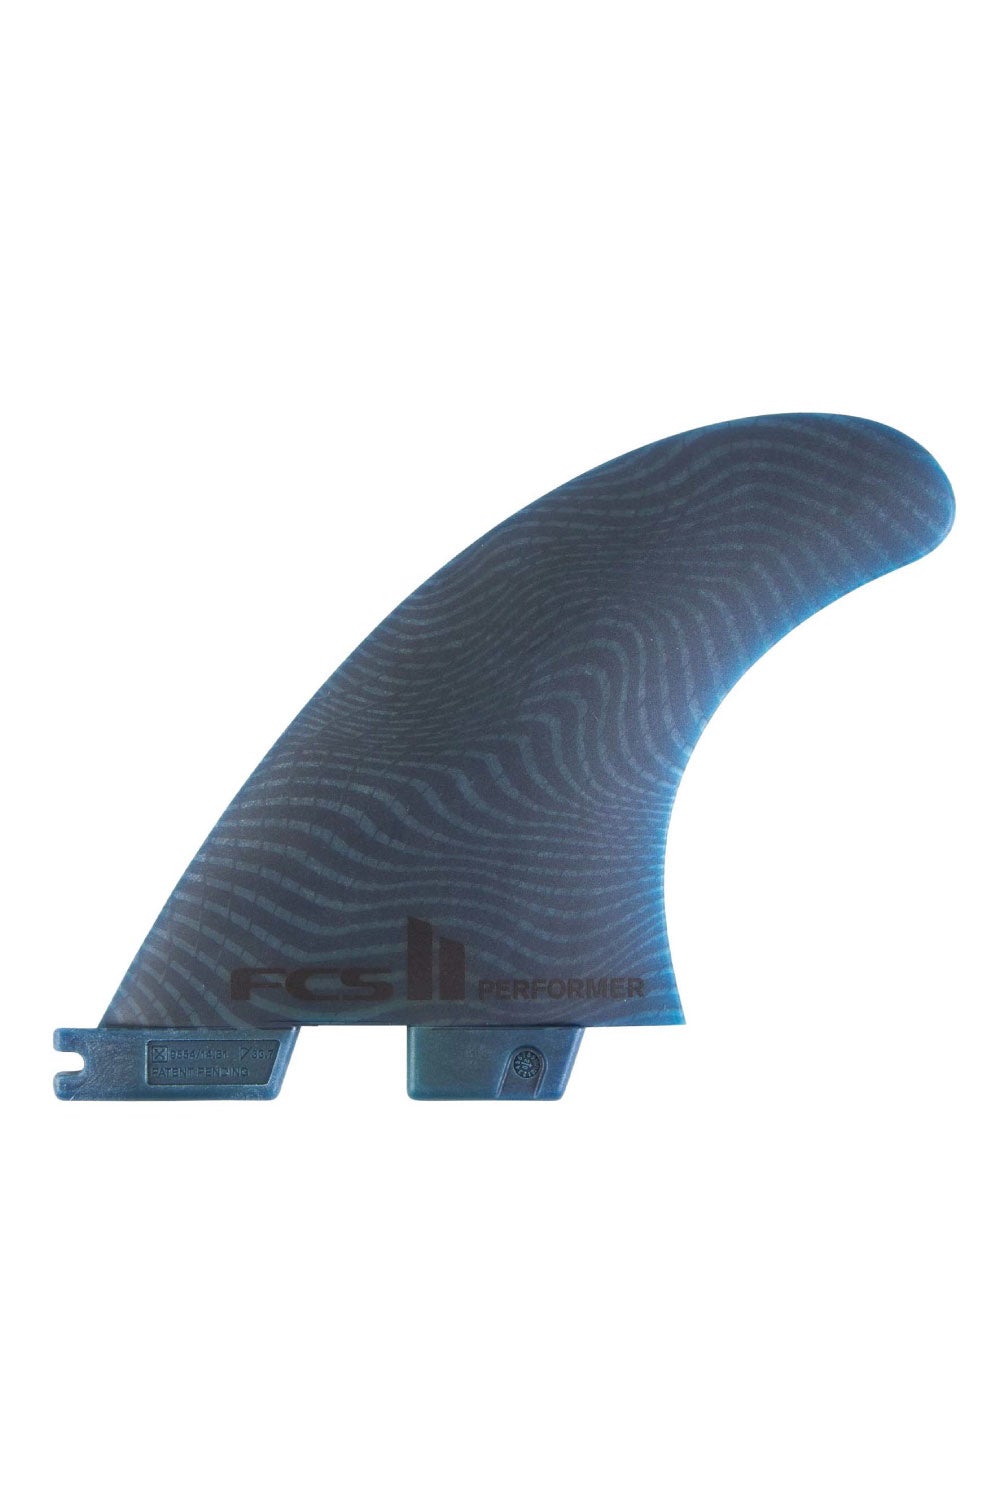 FCS II Performer Neo Glass Pacific Fins - Small